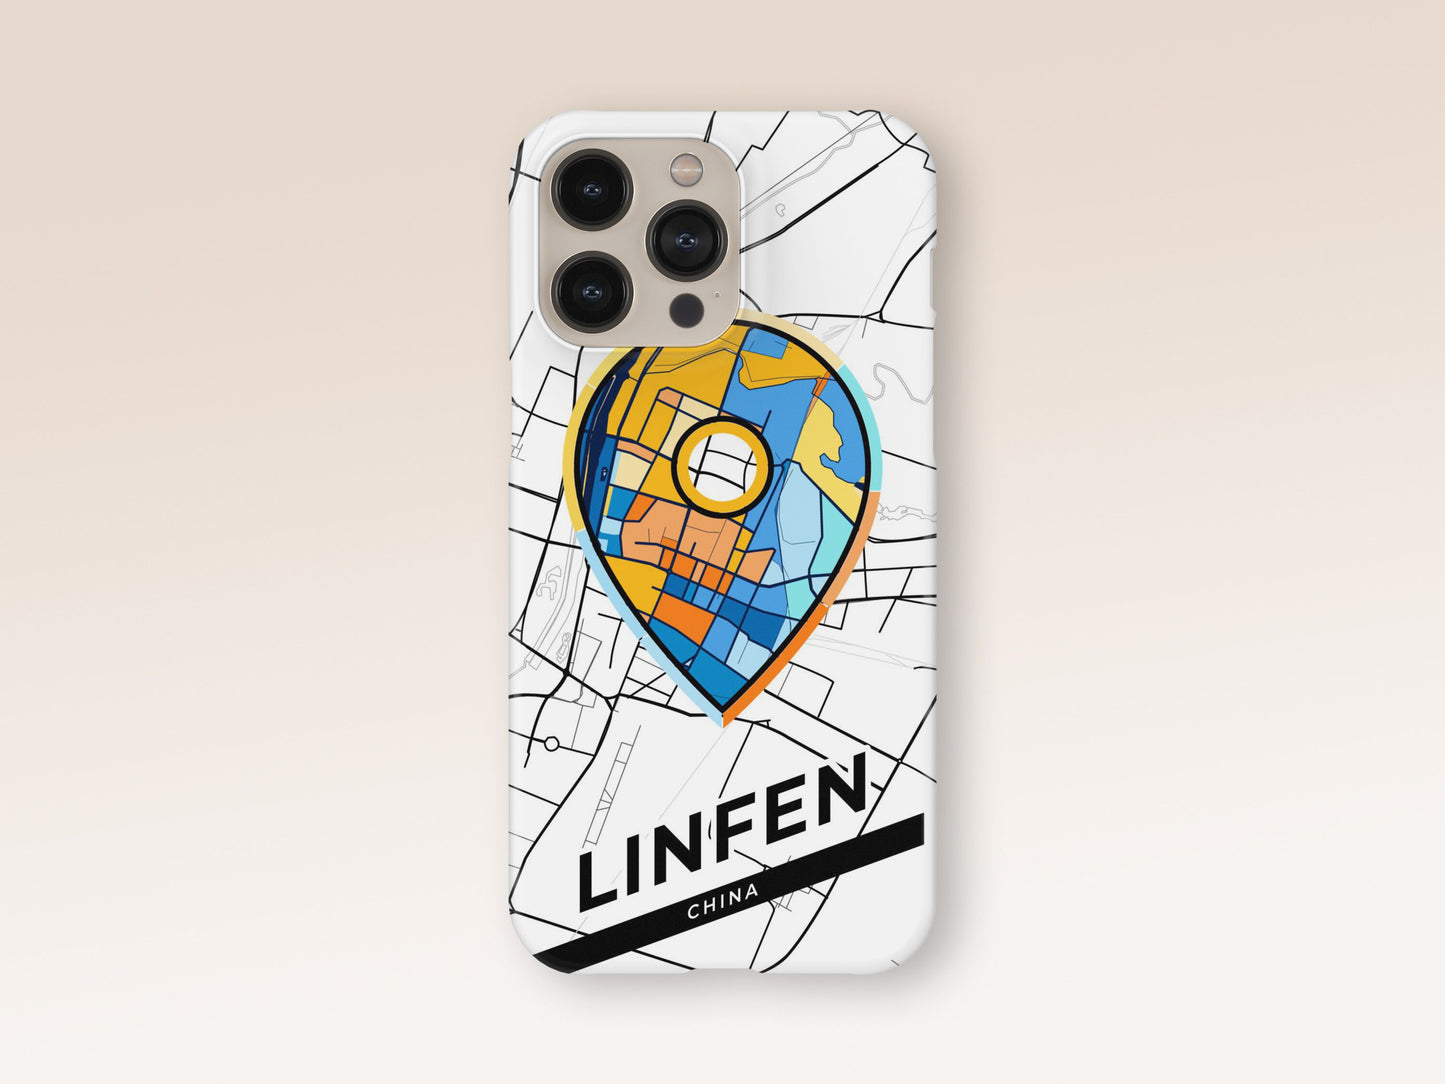 Linfen China slim phone case with colorful icon. Birthday, wedding or housewarming gift. Couple match cases. 1